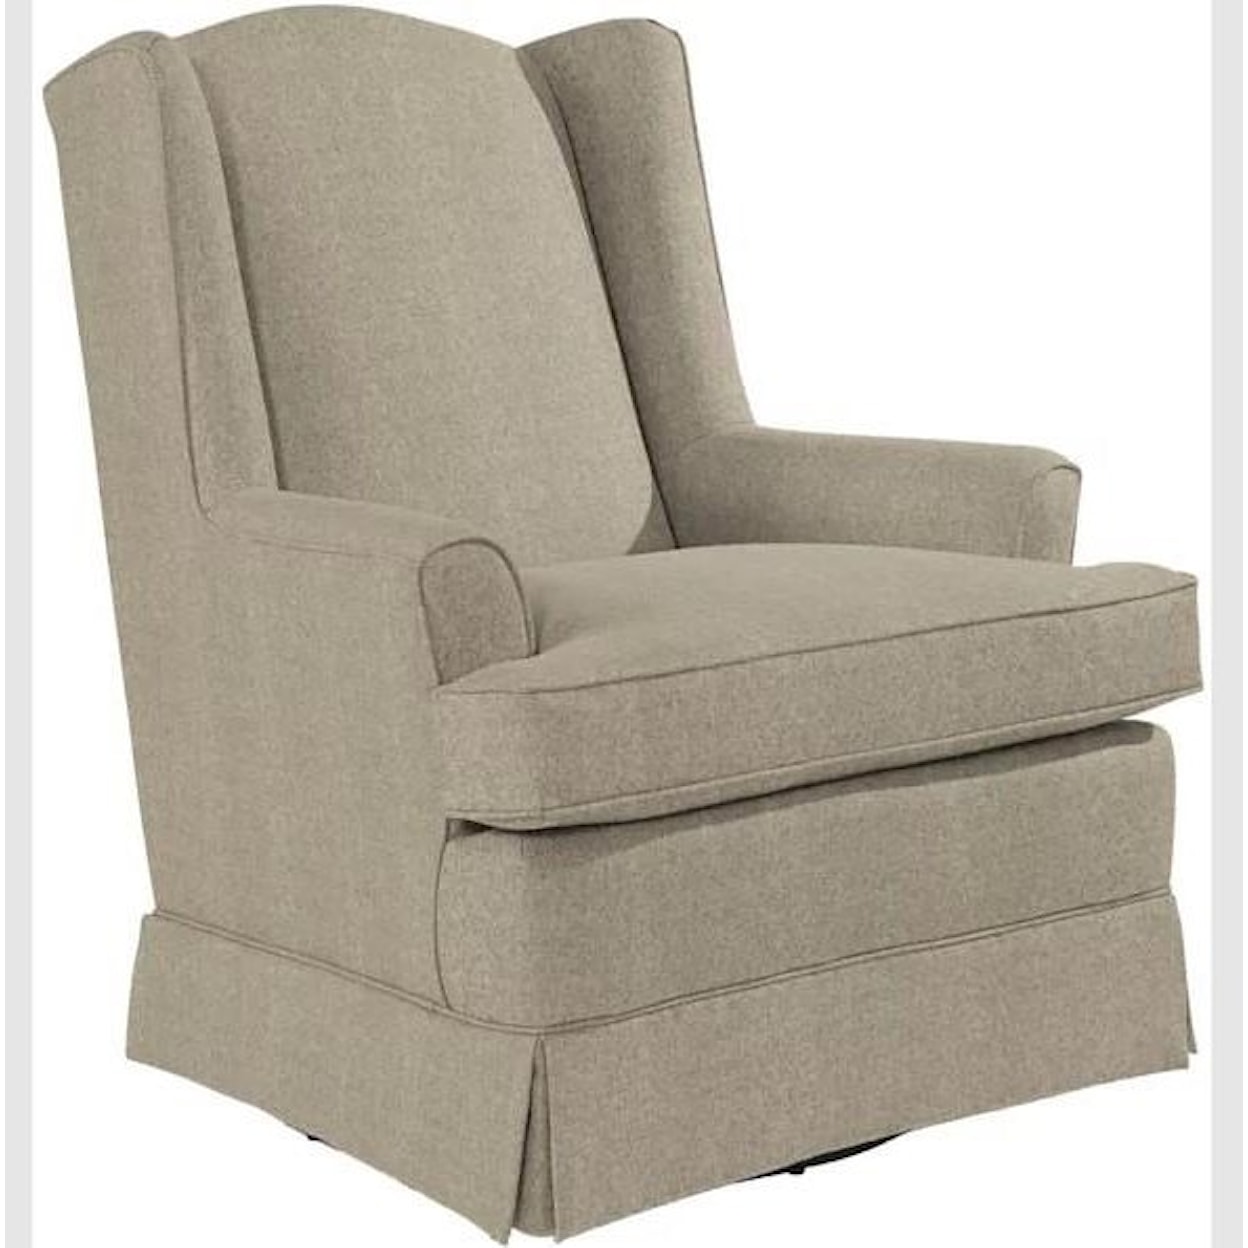 Best Home Furnishings Glider Rockers SWIVEL GLIDER WITH WING BACK AND SKIRT